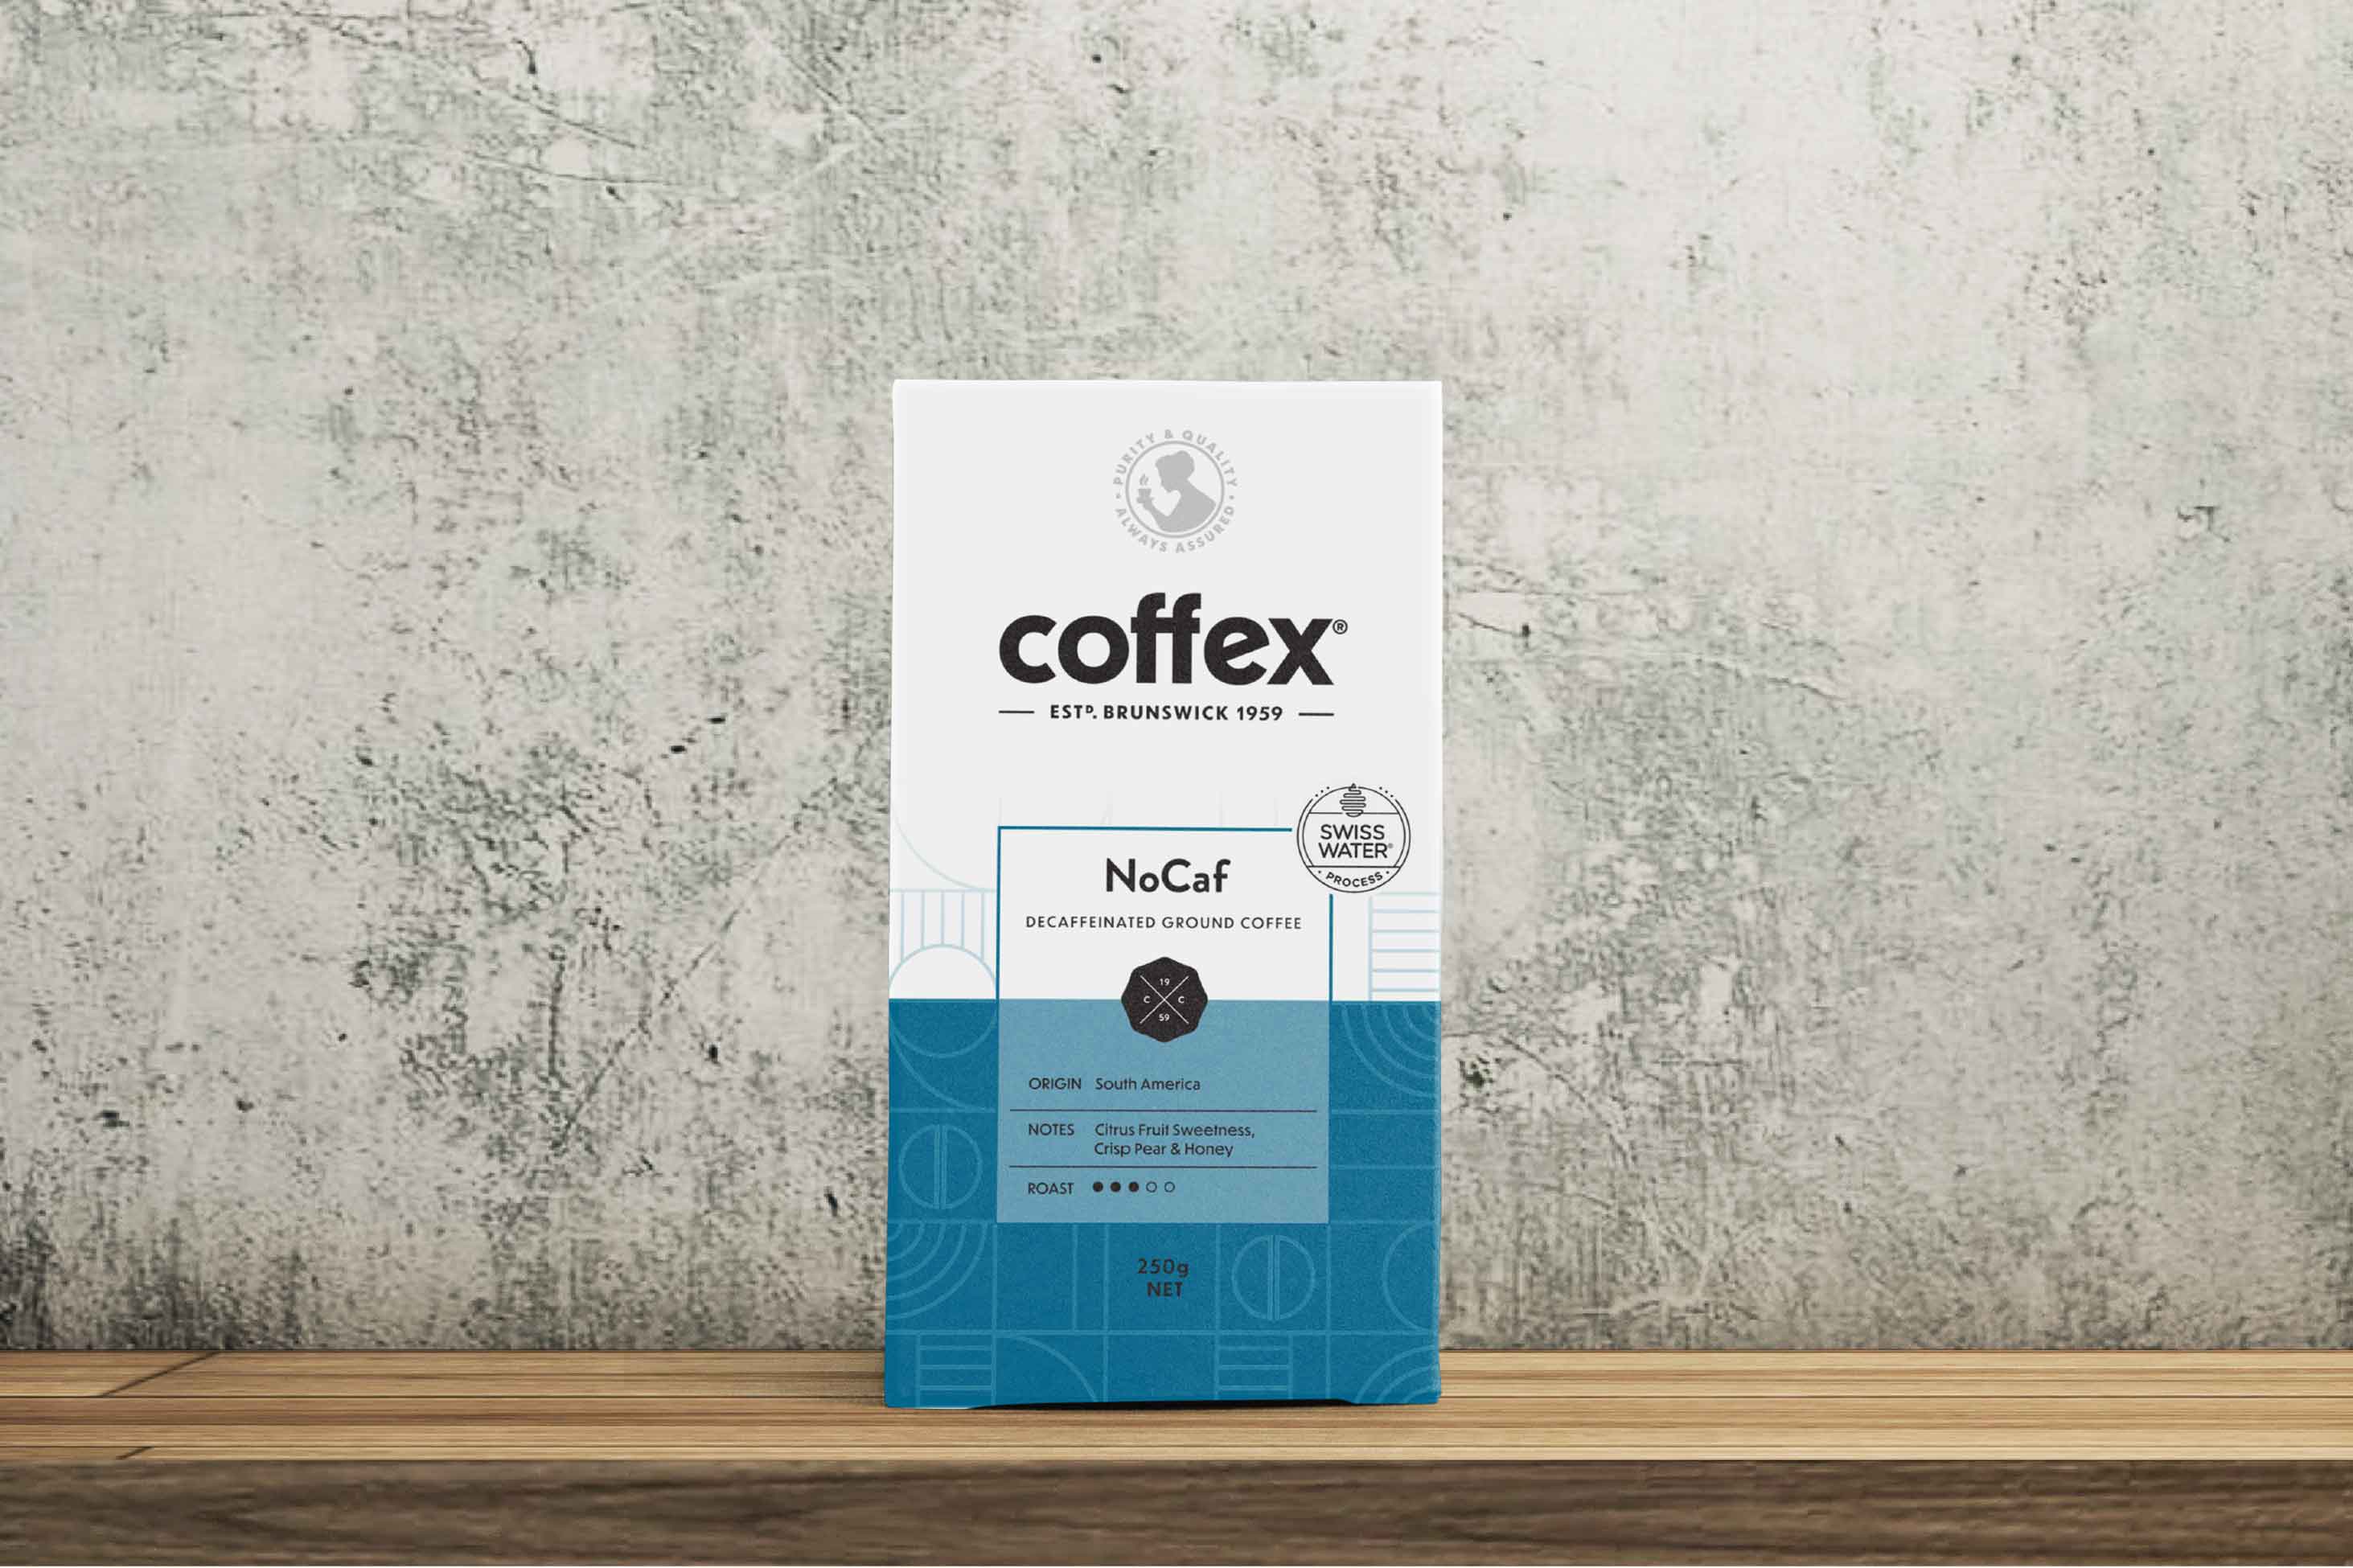 Coffex Classic Decaffeinated "No Caf" coffee, perfect for home decaf espresso, plunger, filter or stovetop moka pot.